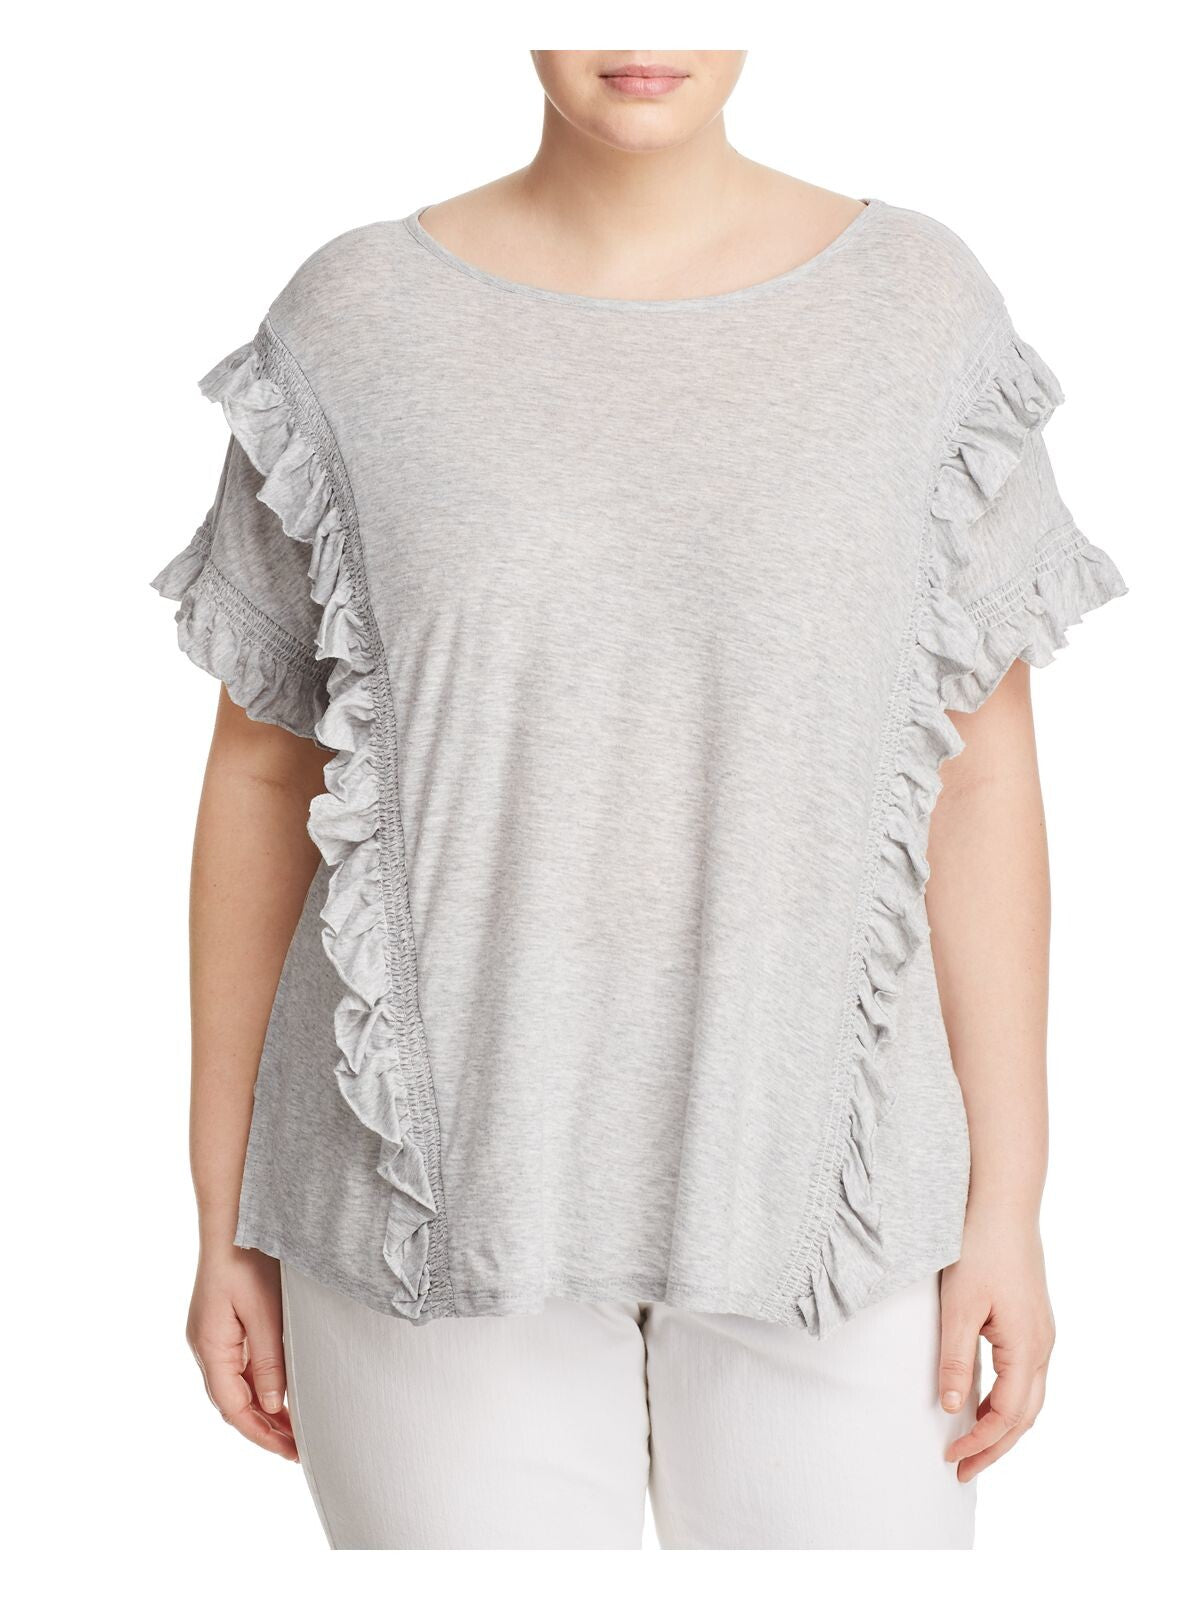 VINCE CAMUTO Womens Gray Knit Smocked Ruffled Heather Flutter Sleeve Scoop Neck Top Plus 1X